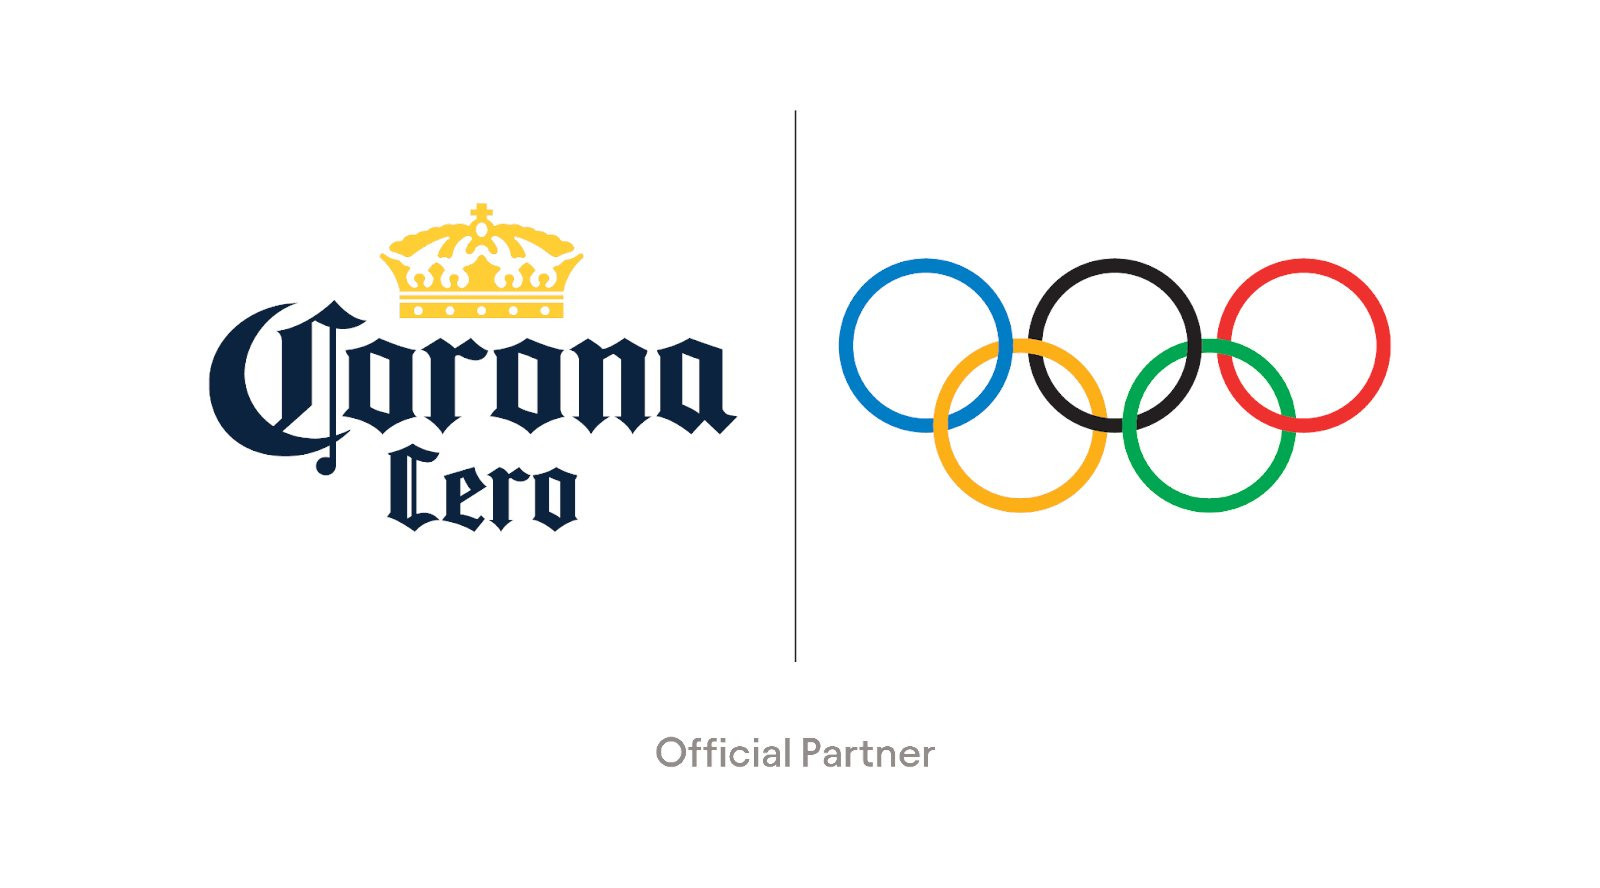 Corona Cero will be the global beer sponsor of the Olympic Games. IOC